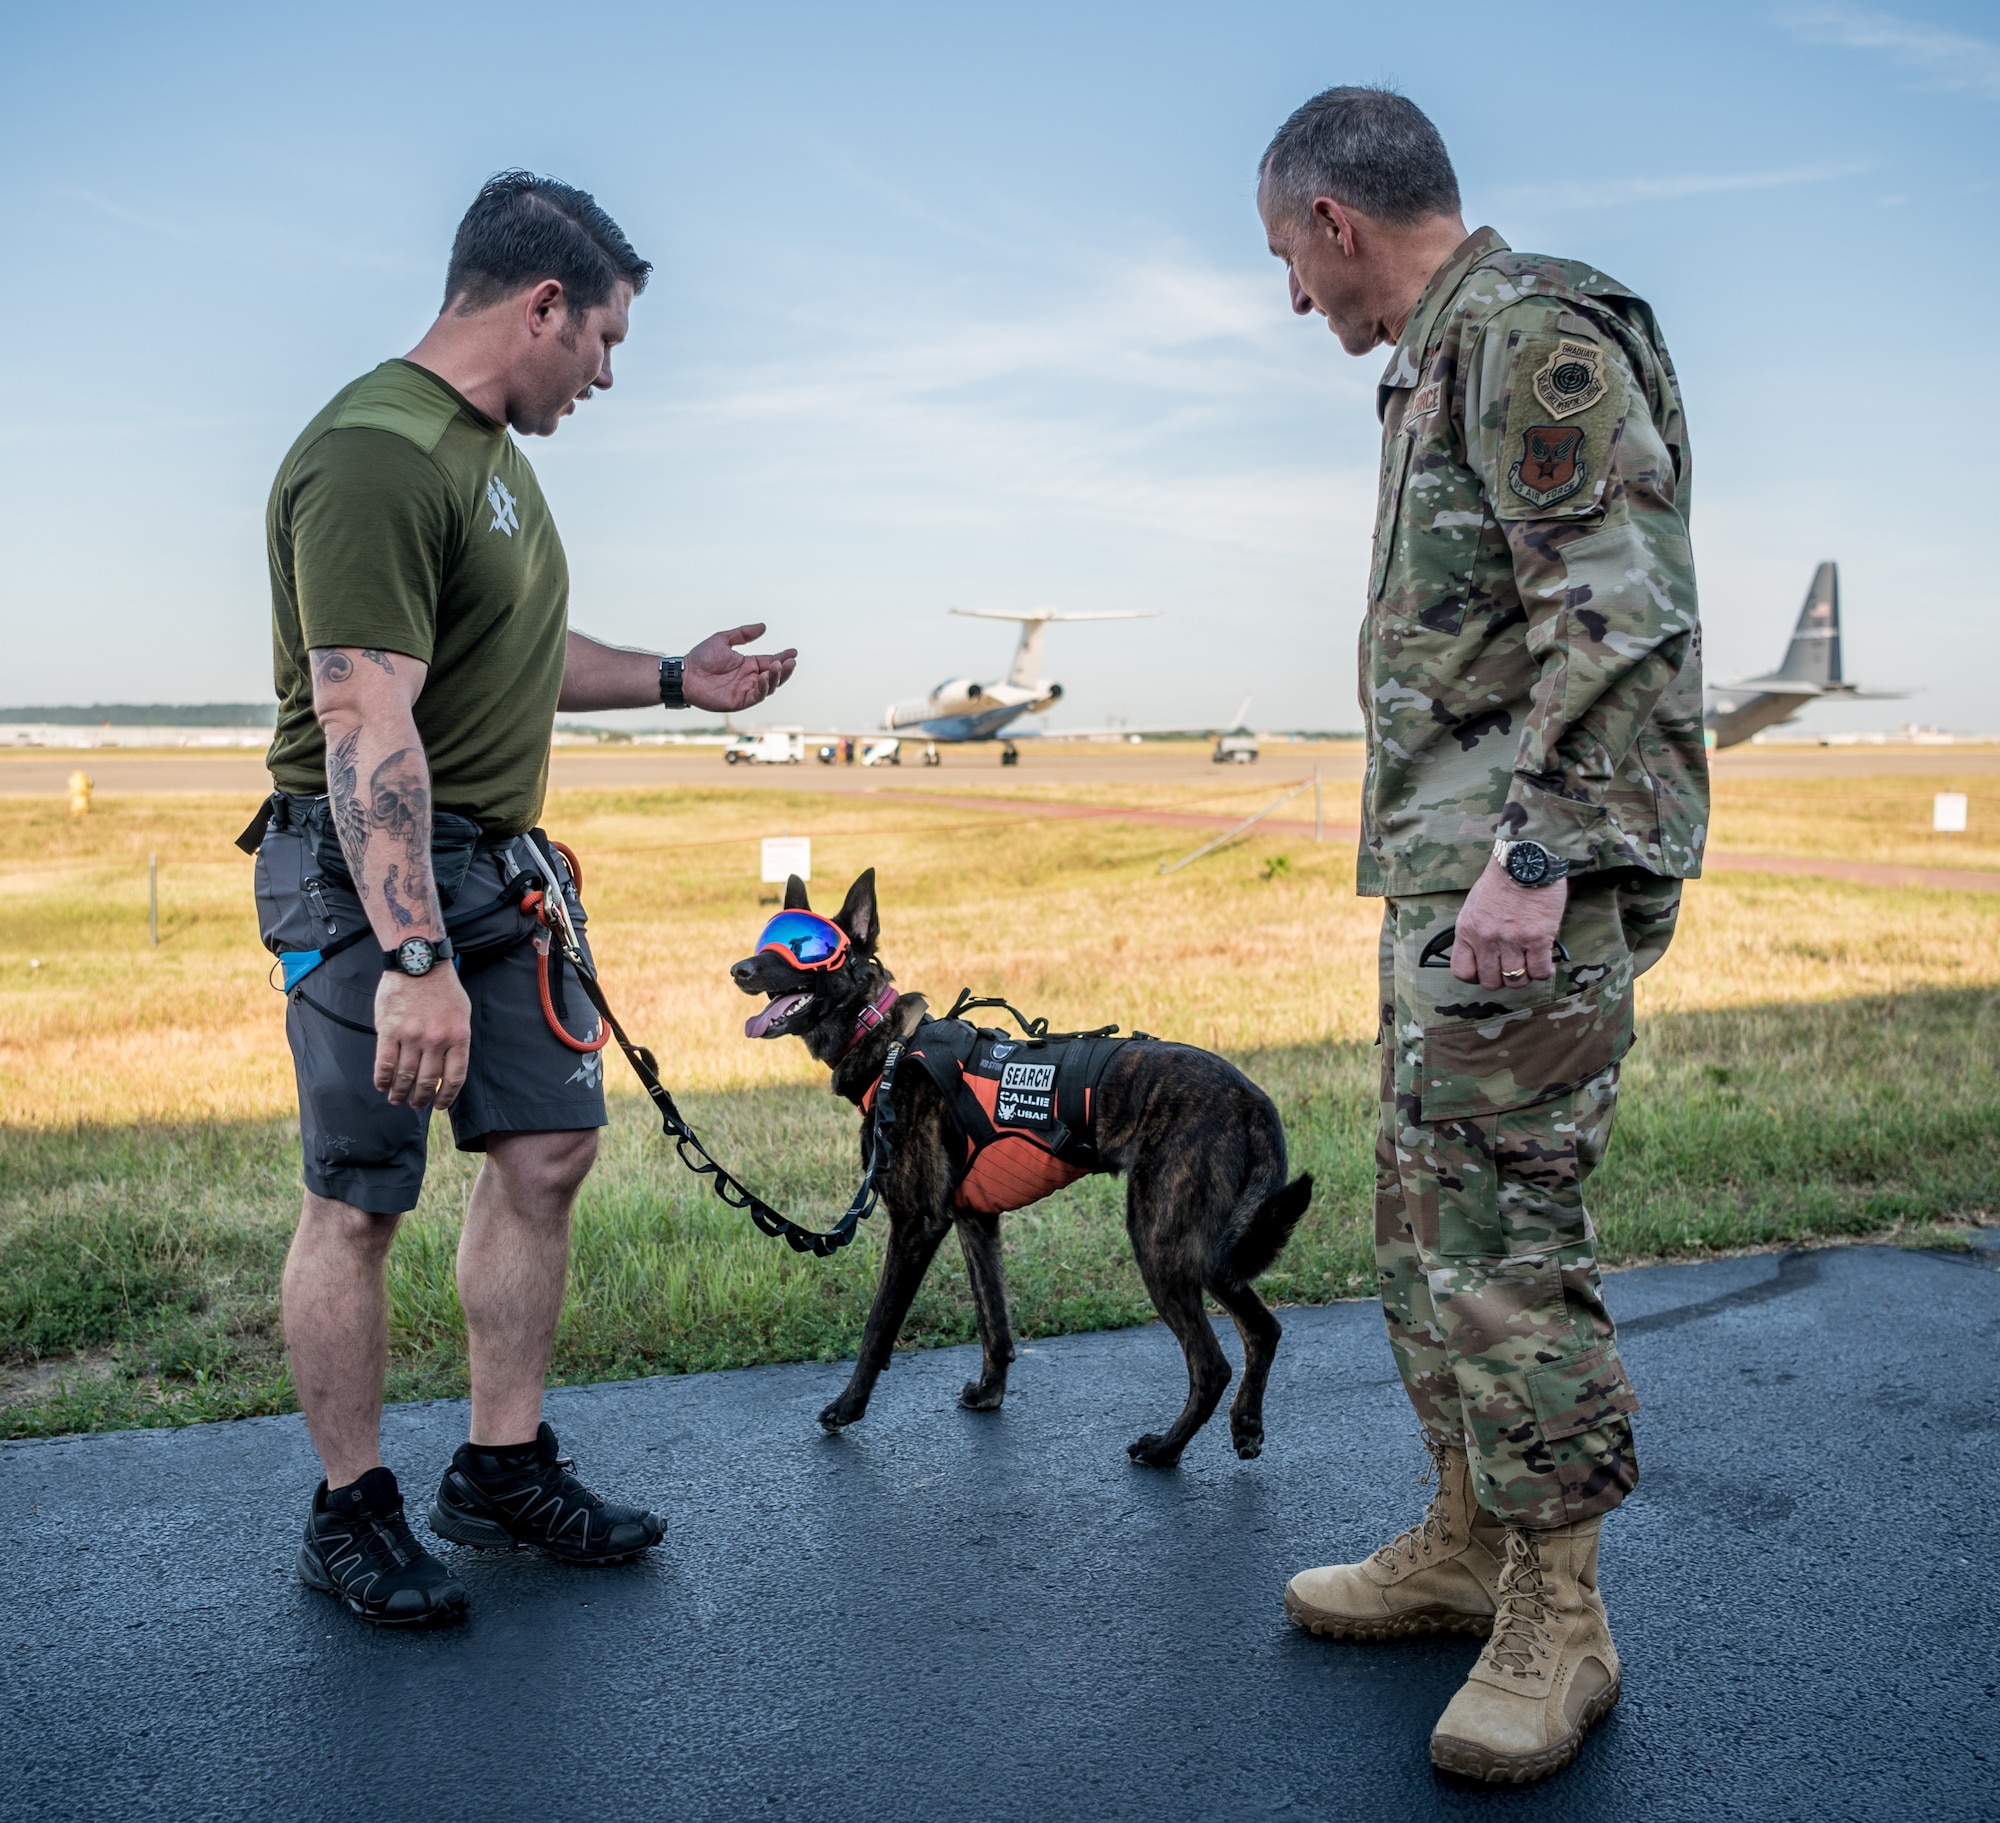 Air Force Chief of Staff Gen. David L. Goldfein (right), meets Callie, the only search-and-rescue dog in the Department of Defense, and her handler, Master Sgt. Rudy Parsons, a pararescueman in the 123rd Special Tactics Squadron, during a tour of the Kentucky Air National Guard Base in Louisville, Ky., Aug. 10, 2019. Goldfein toured various work centers, learning about the unique mission sets of the 123rd Airlift Wing. (U.S. Air National Guard photo by Staff Sgt. Joshua Horton)